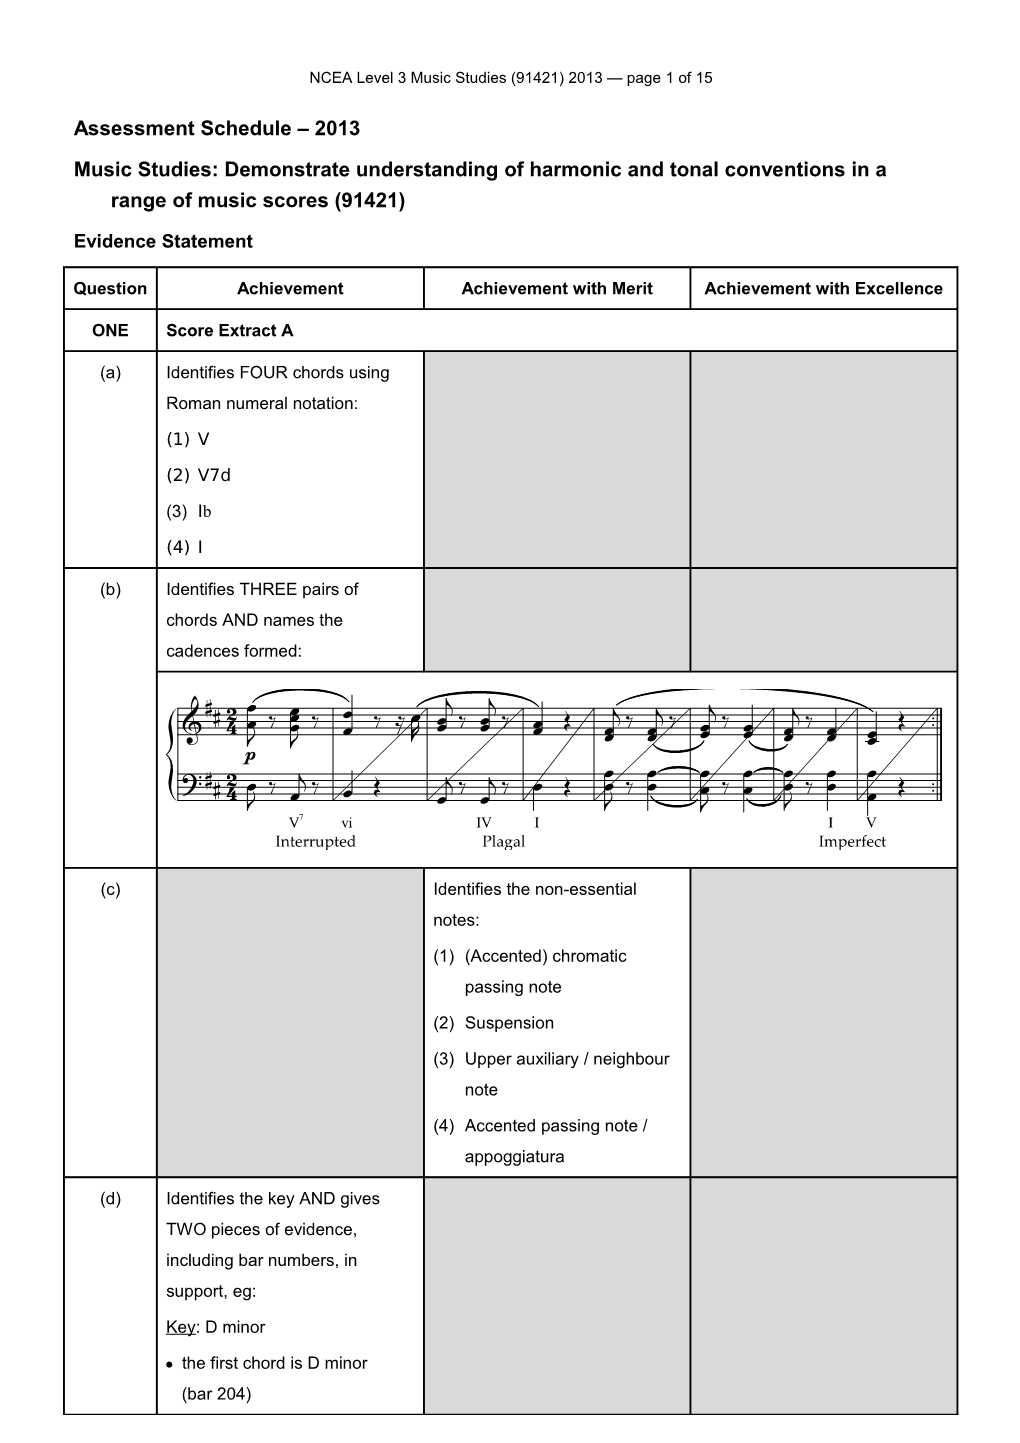 NCEA Level 3 Music Studies (91421) 2013 Assessment Schedule